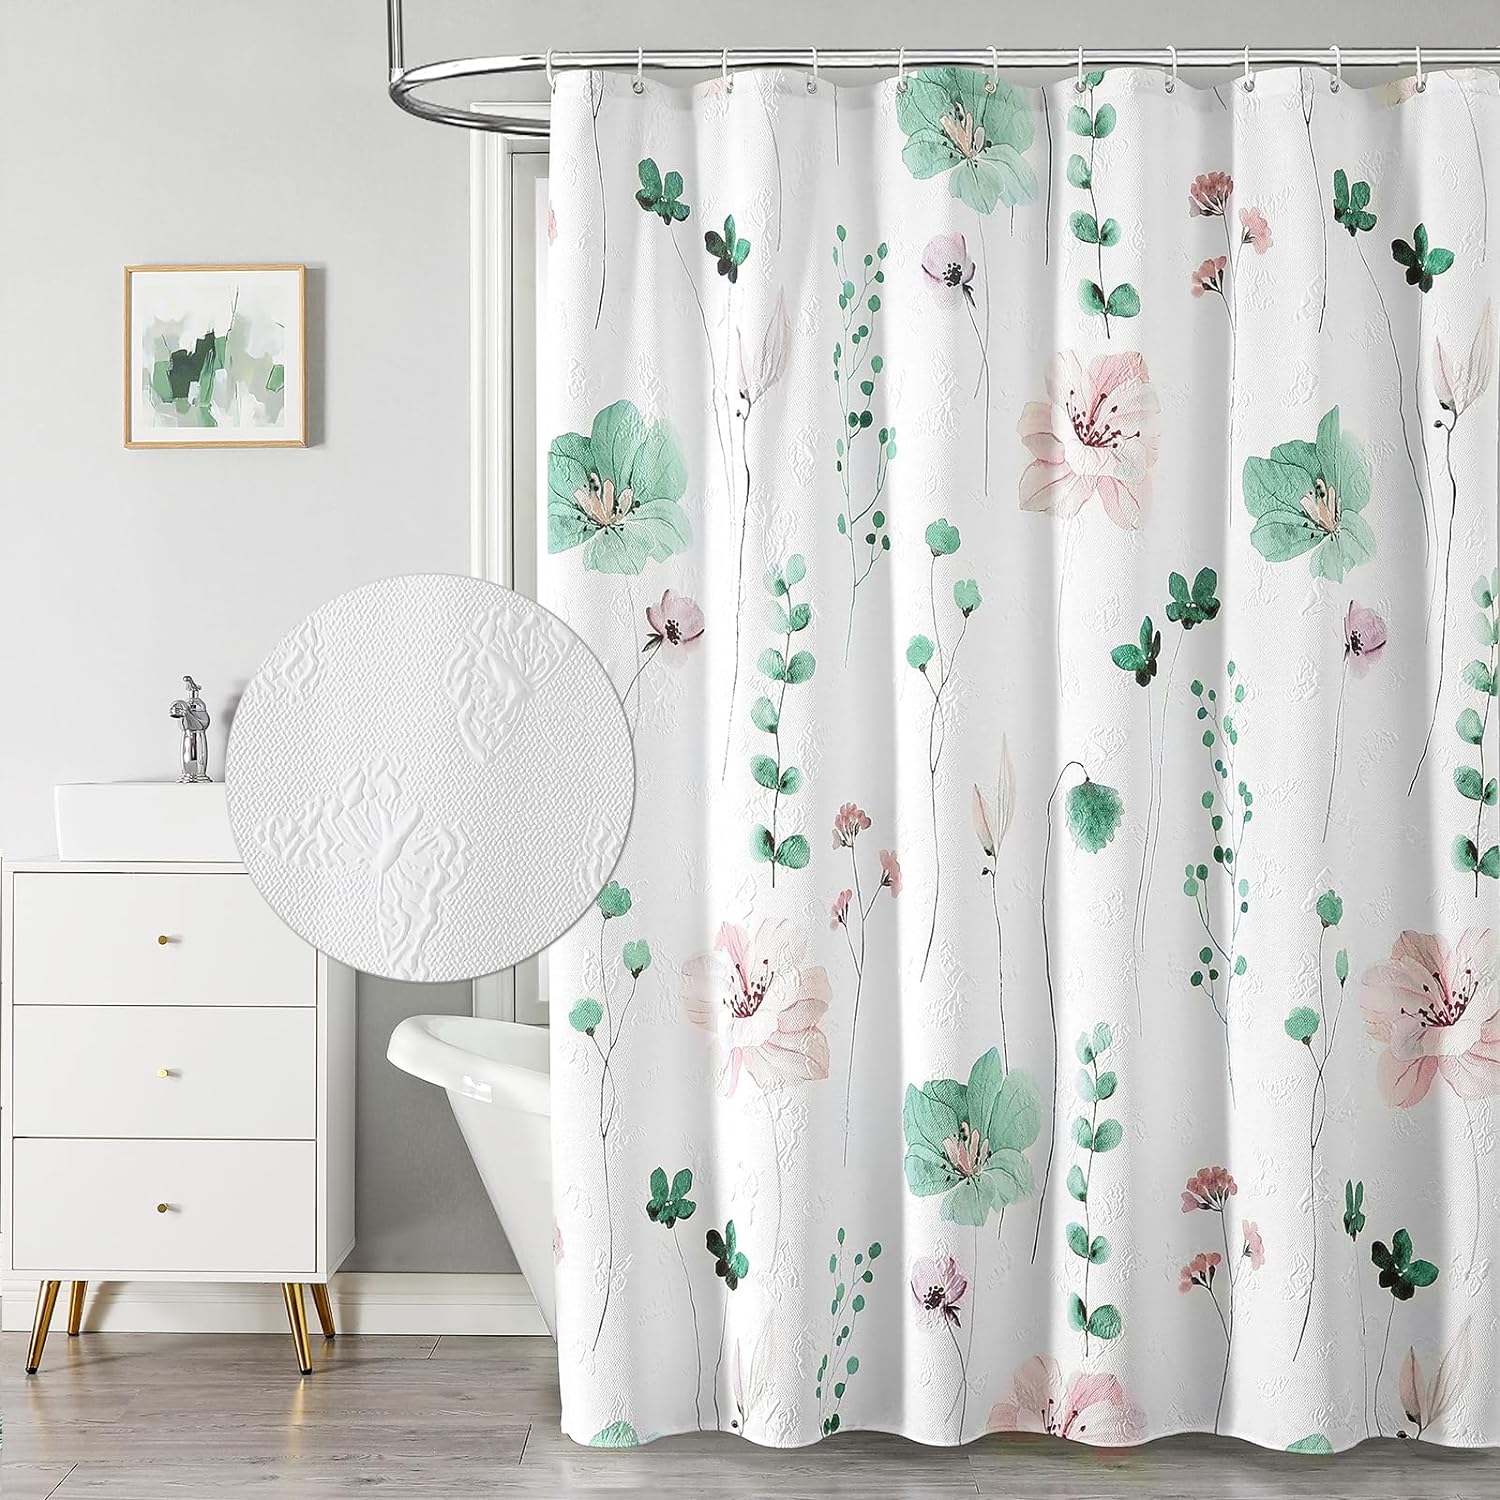 QiyI Watercolor Floral Shower Curtain, 3D Embossed Textured Sage Green Flower Bathroom Curtain, Modern Minimalist White Cloth Bath Curtain, Waterproof Fabric Shower Curtain Set with Hooks, 72x72 Inch